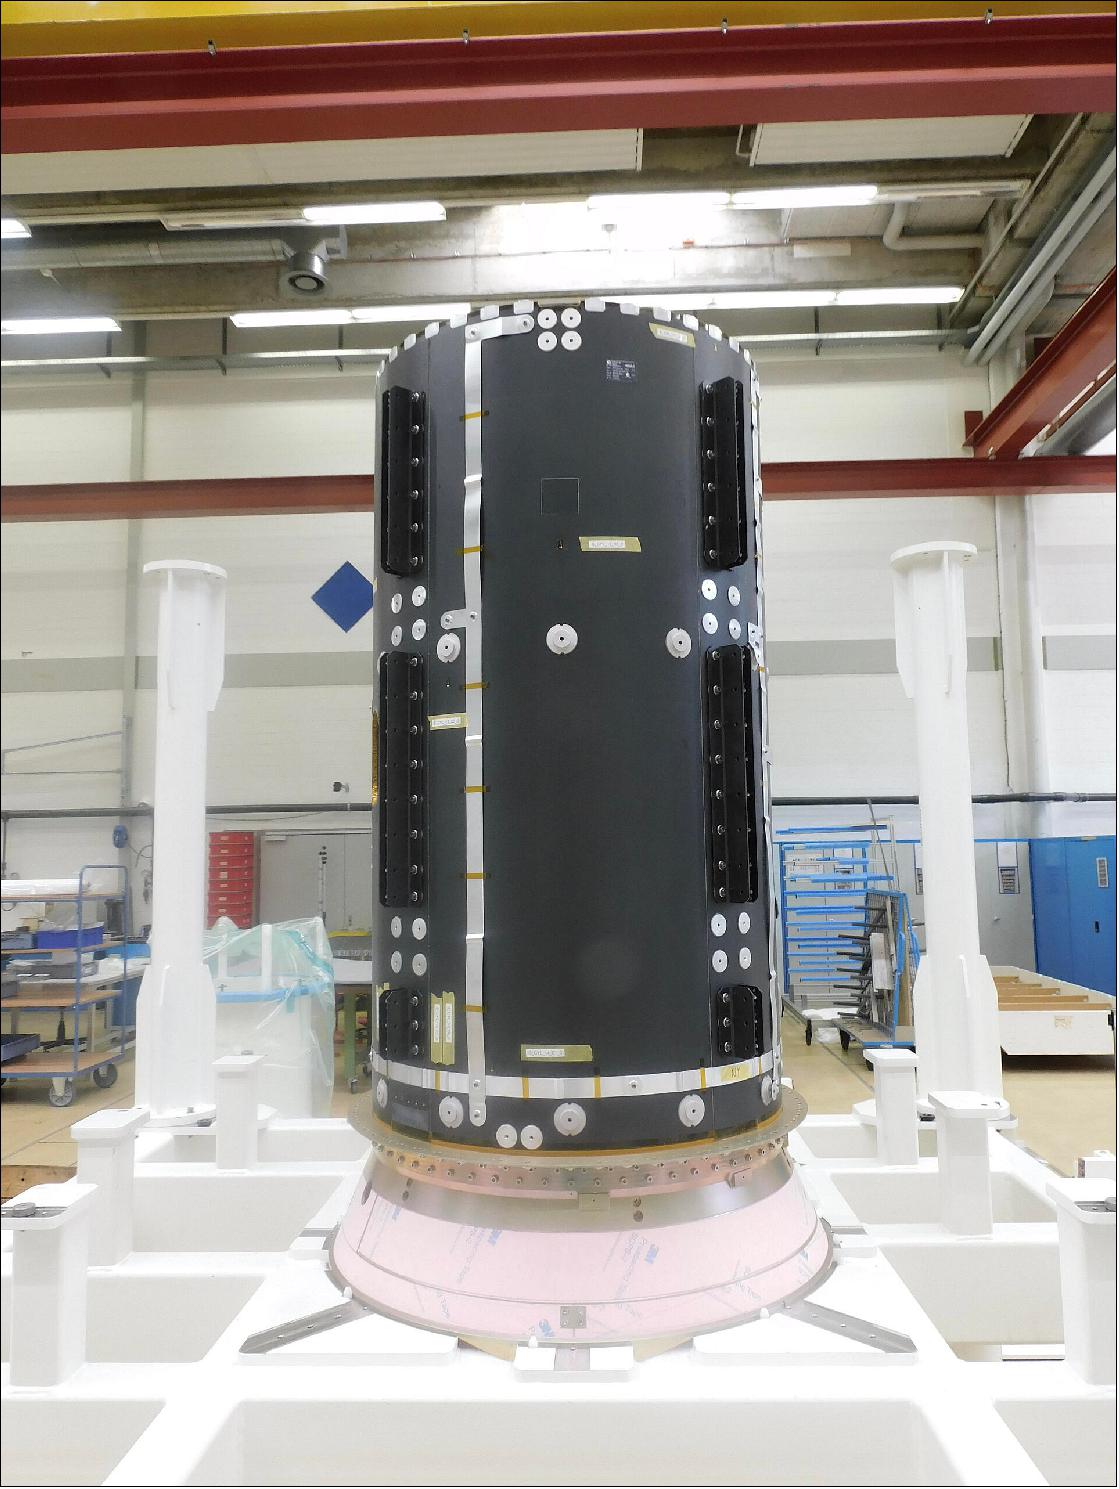 Figure 10: The stiff, strong core serves as a backbone to the spacecraft, built for ESA by a team from RUAG Space in Switzerland and OHB in the Czech Republic. Once current ‘static load’ testing confirms its performance, the core will be shipped to OHB in Germany to assemble the spacecraft’s primary structure around it (image credit: RUAG Space)